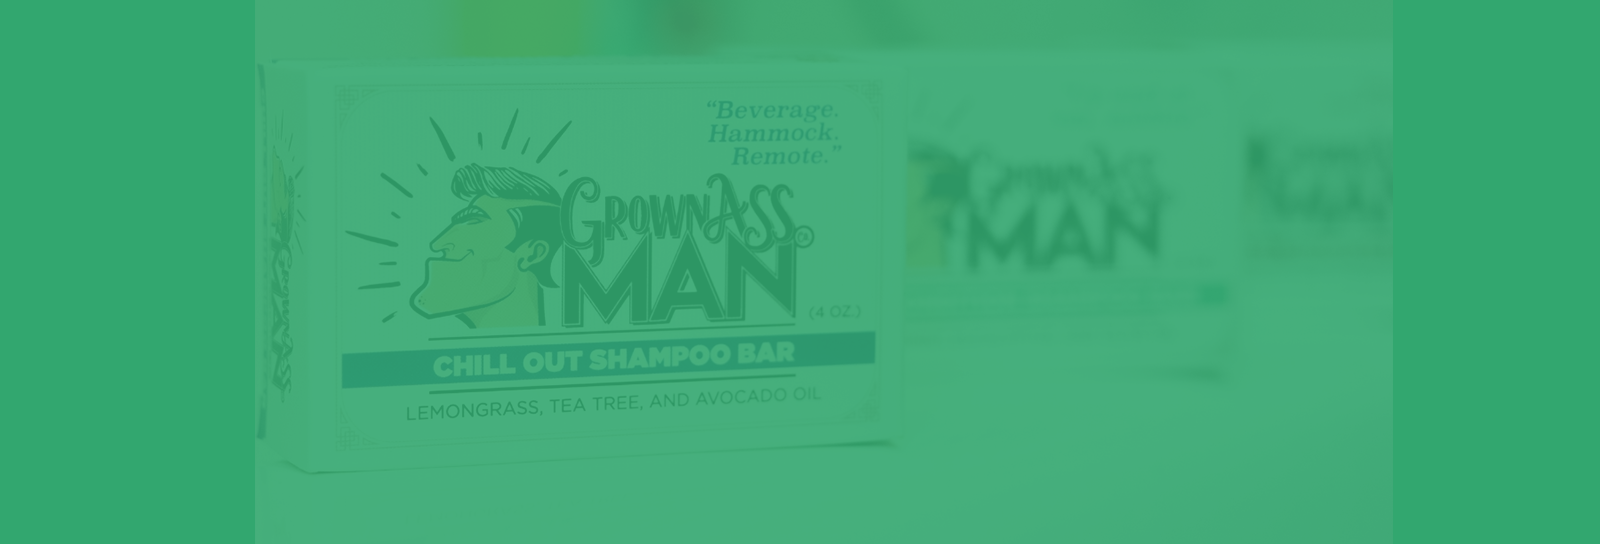 Shampoo Bars: What's the Big Deal, Anyway?